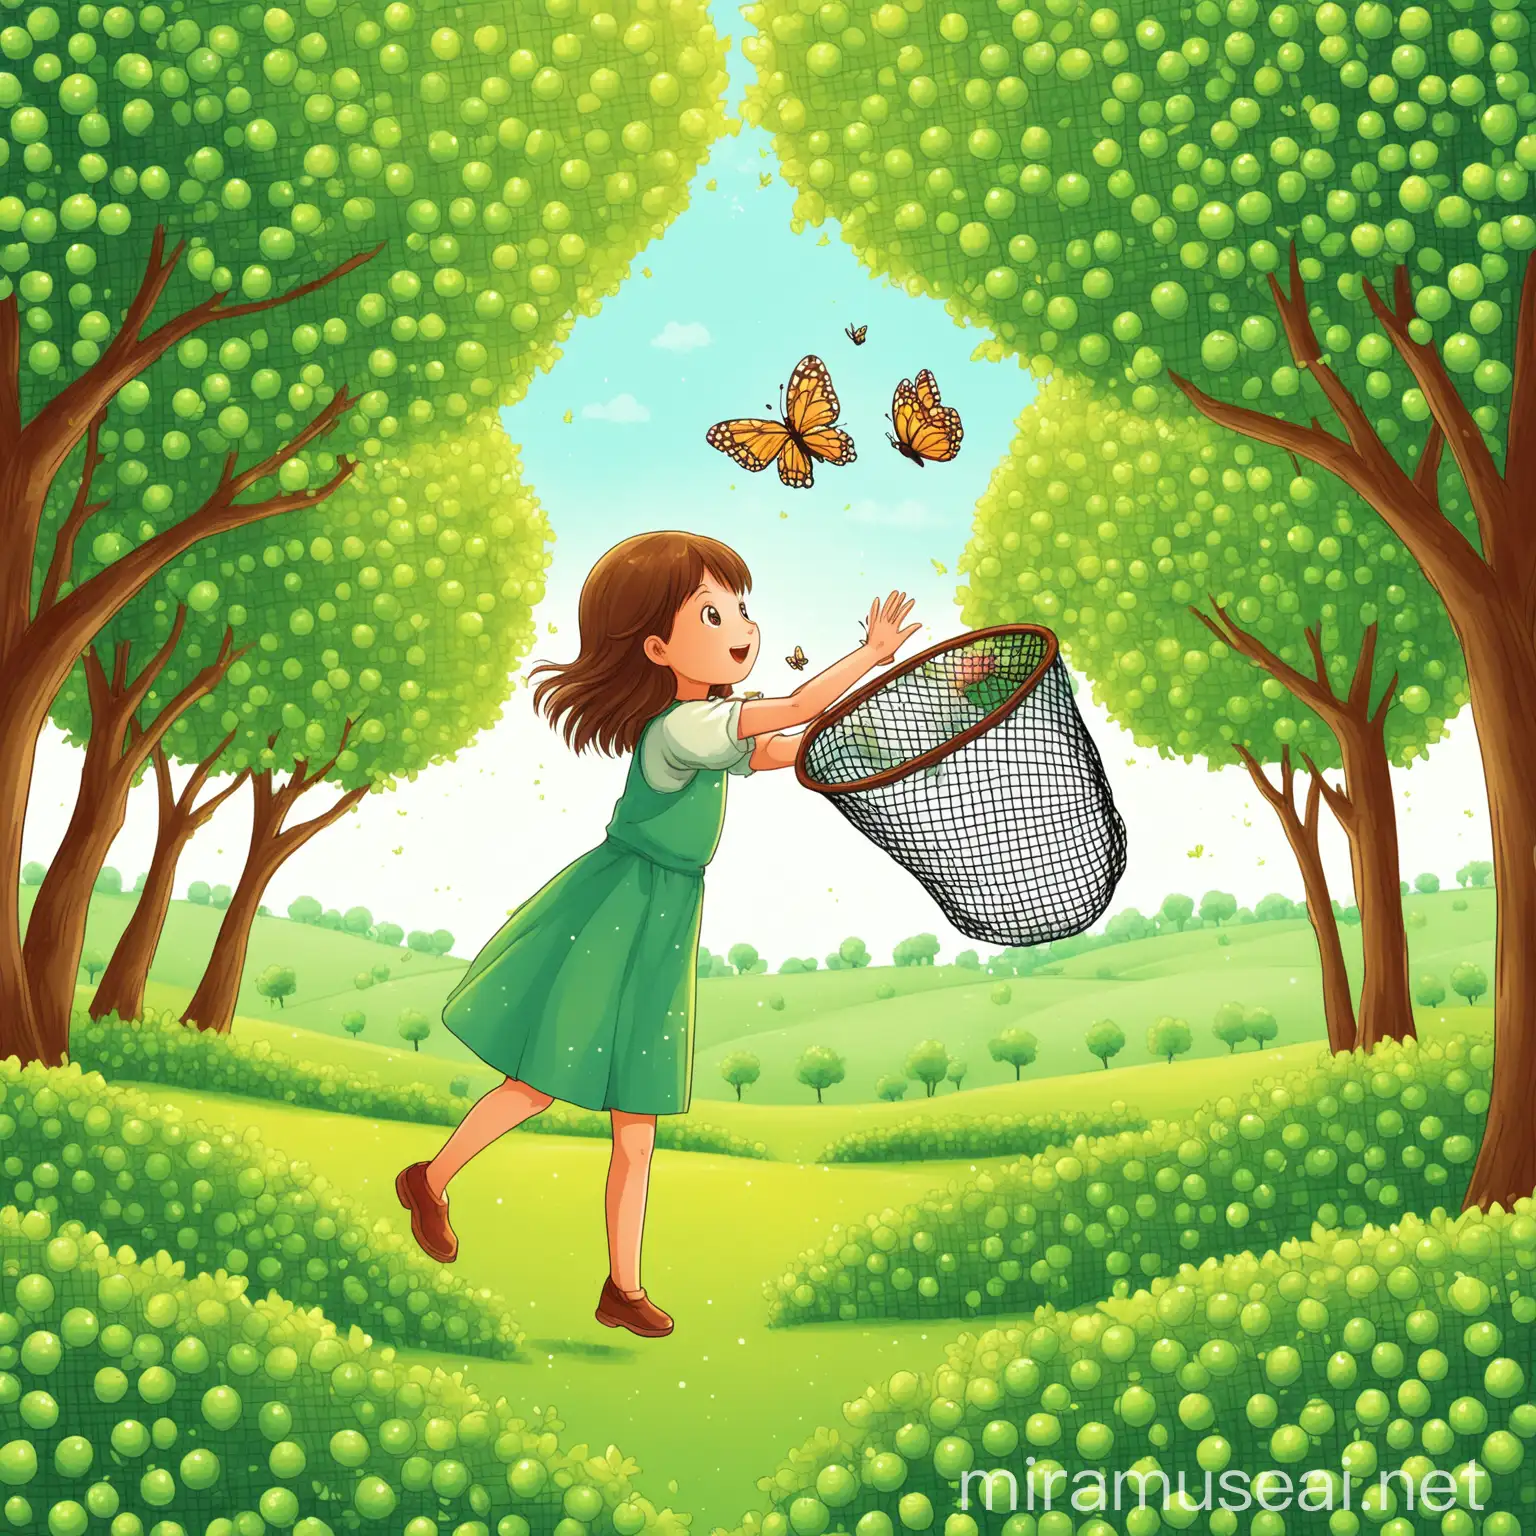 a children book style illustration: a girl catching butterfly with a net in a green orchard with trees